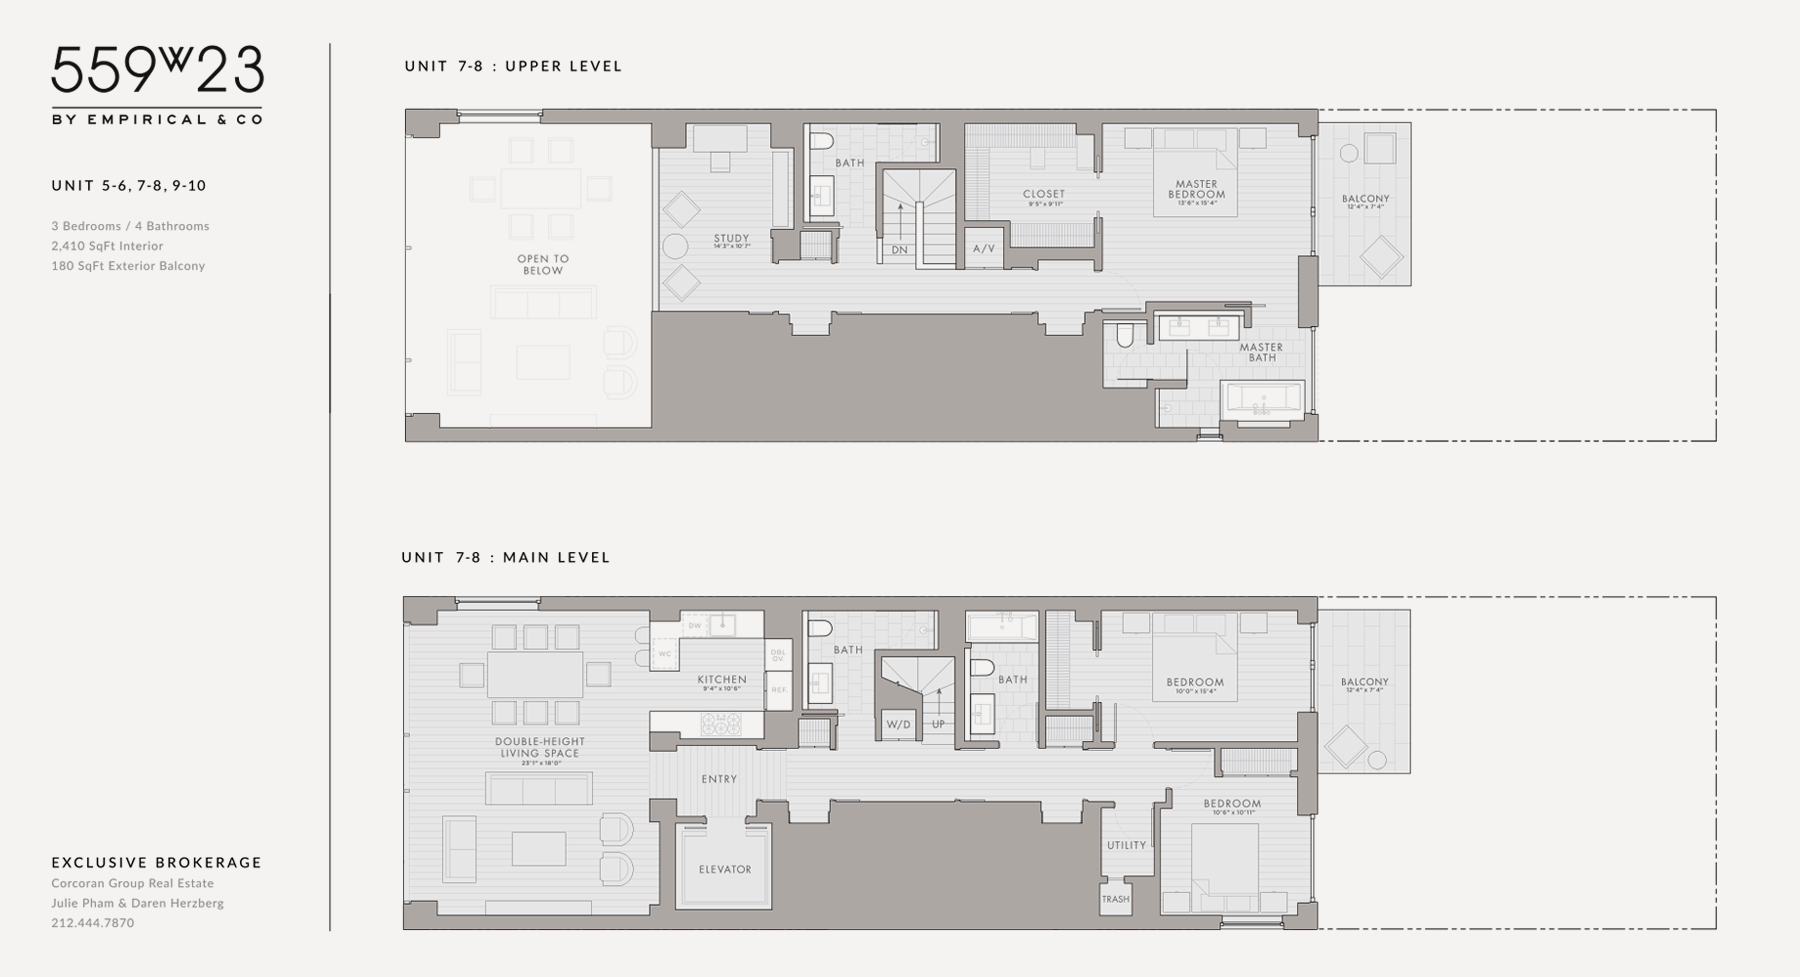 Simple Graphic Floor Plans and Elevations for Architecture